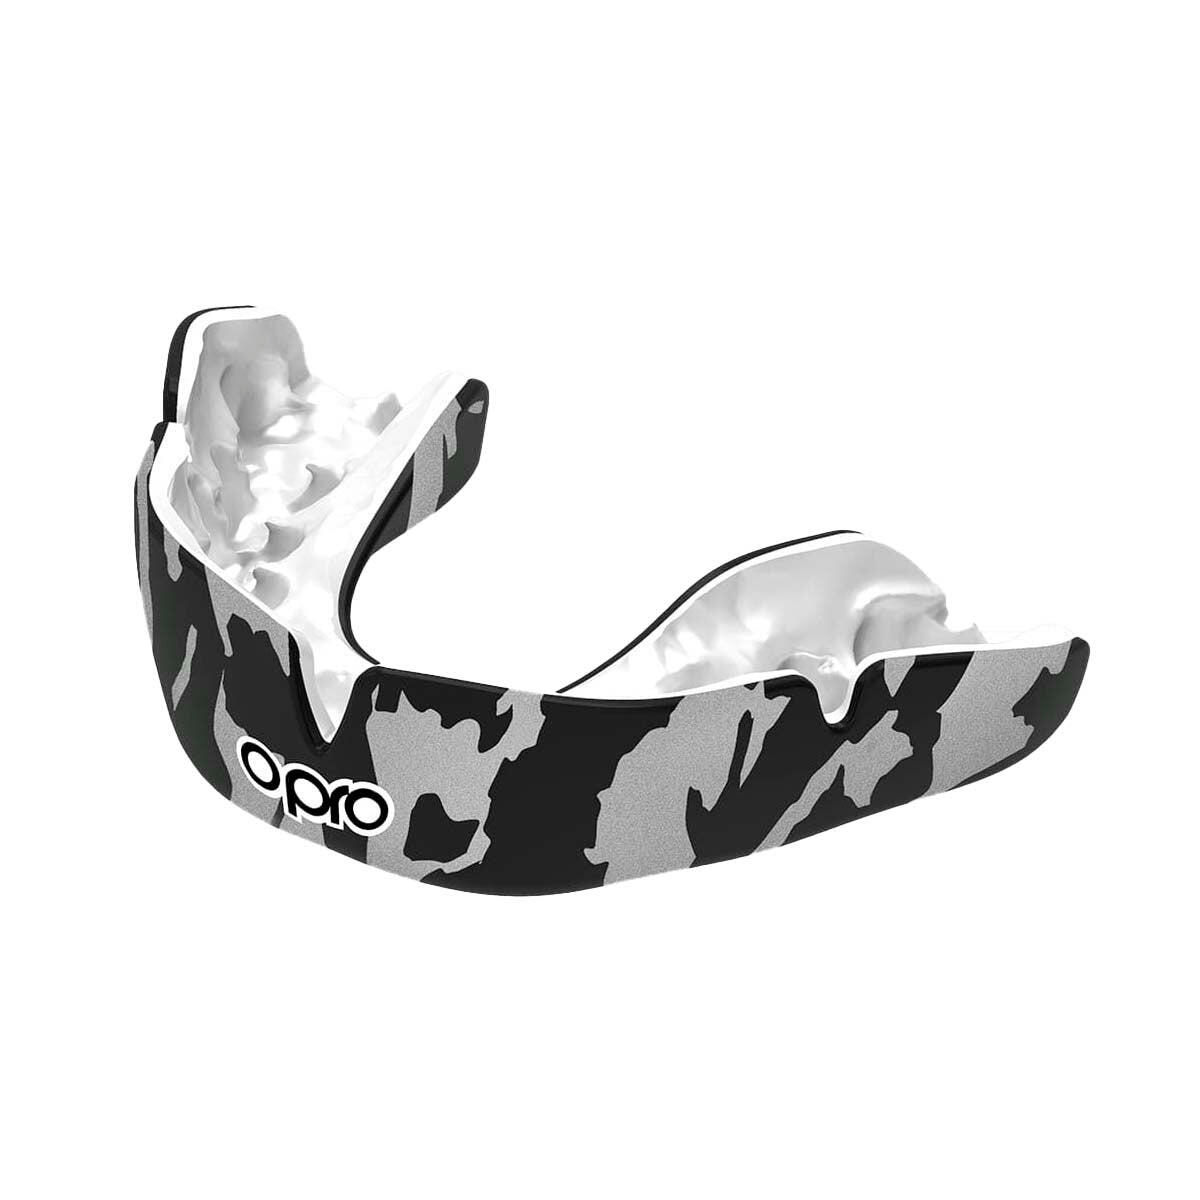 Black/White/Silver Opro Instant Custom-Fit Camo Mouth Guard 6/6